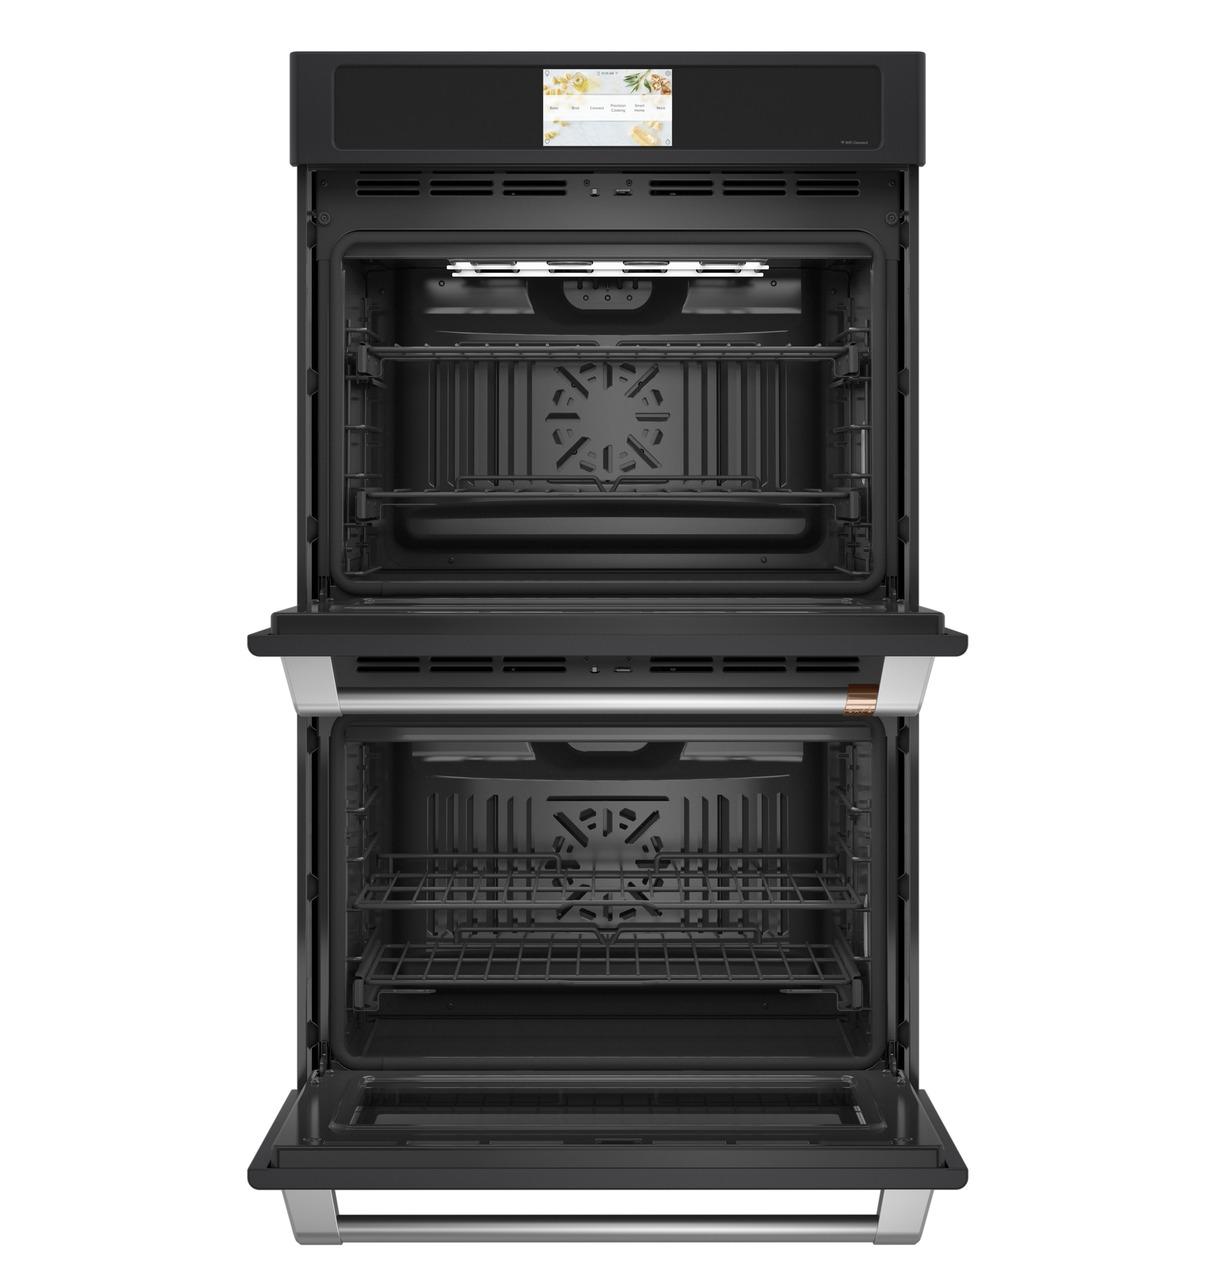 Cafe Caf(eback)™ Professional Series 30" Smart Built-In Convection Double Wall Oven